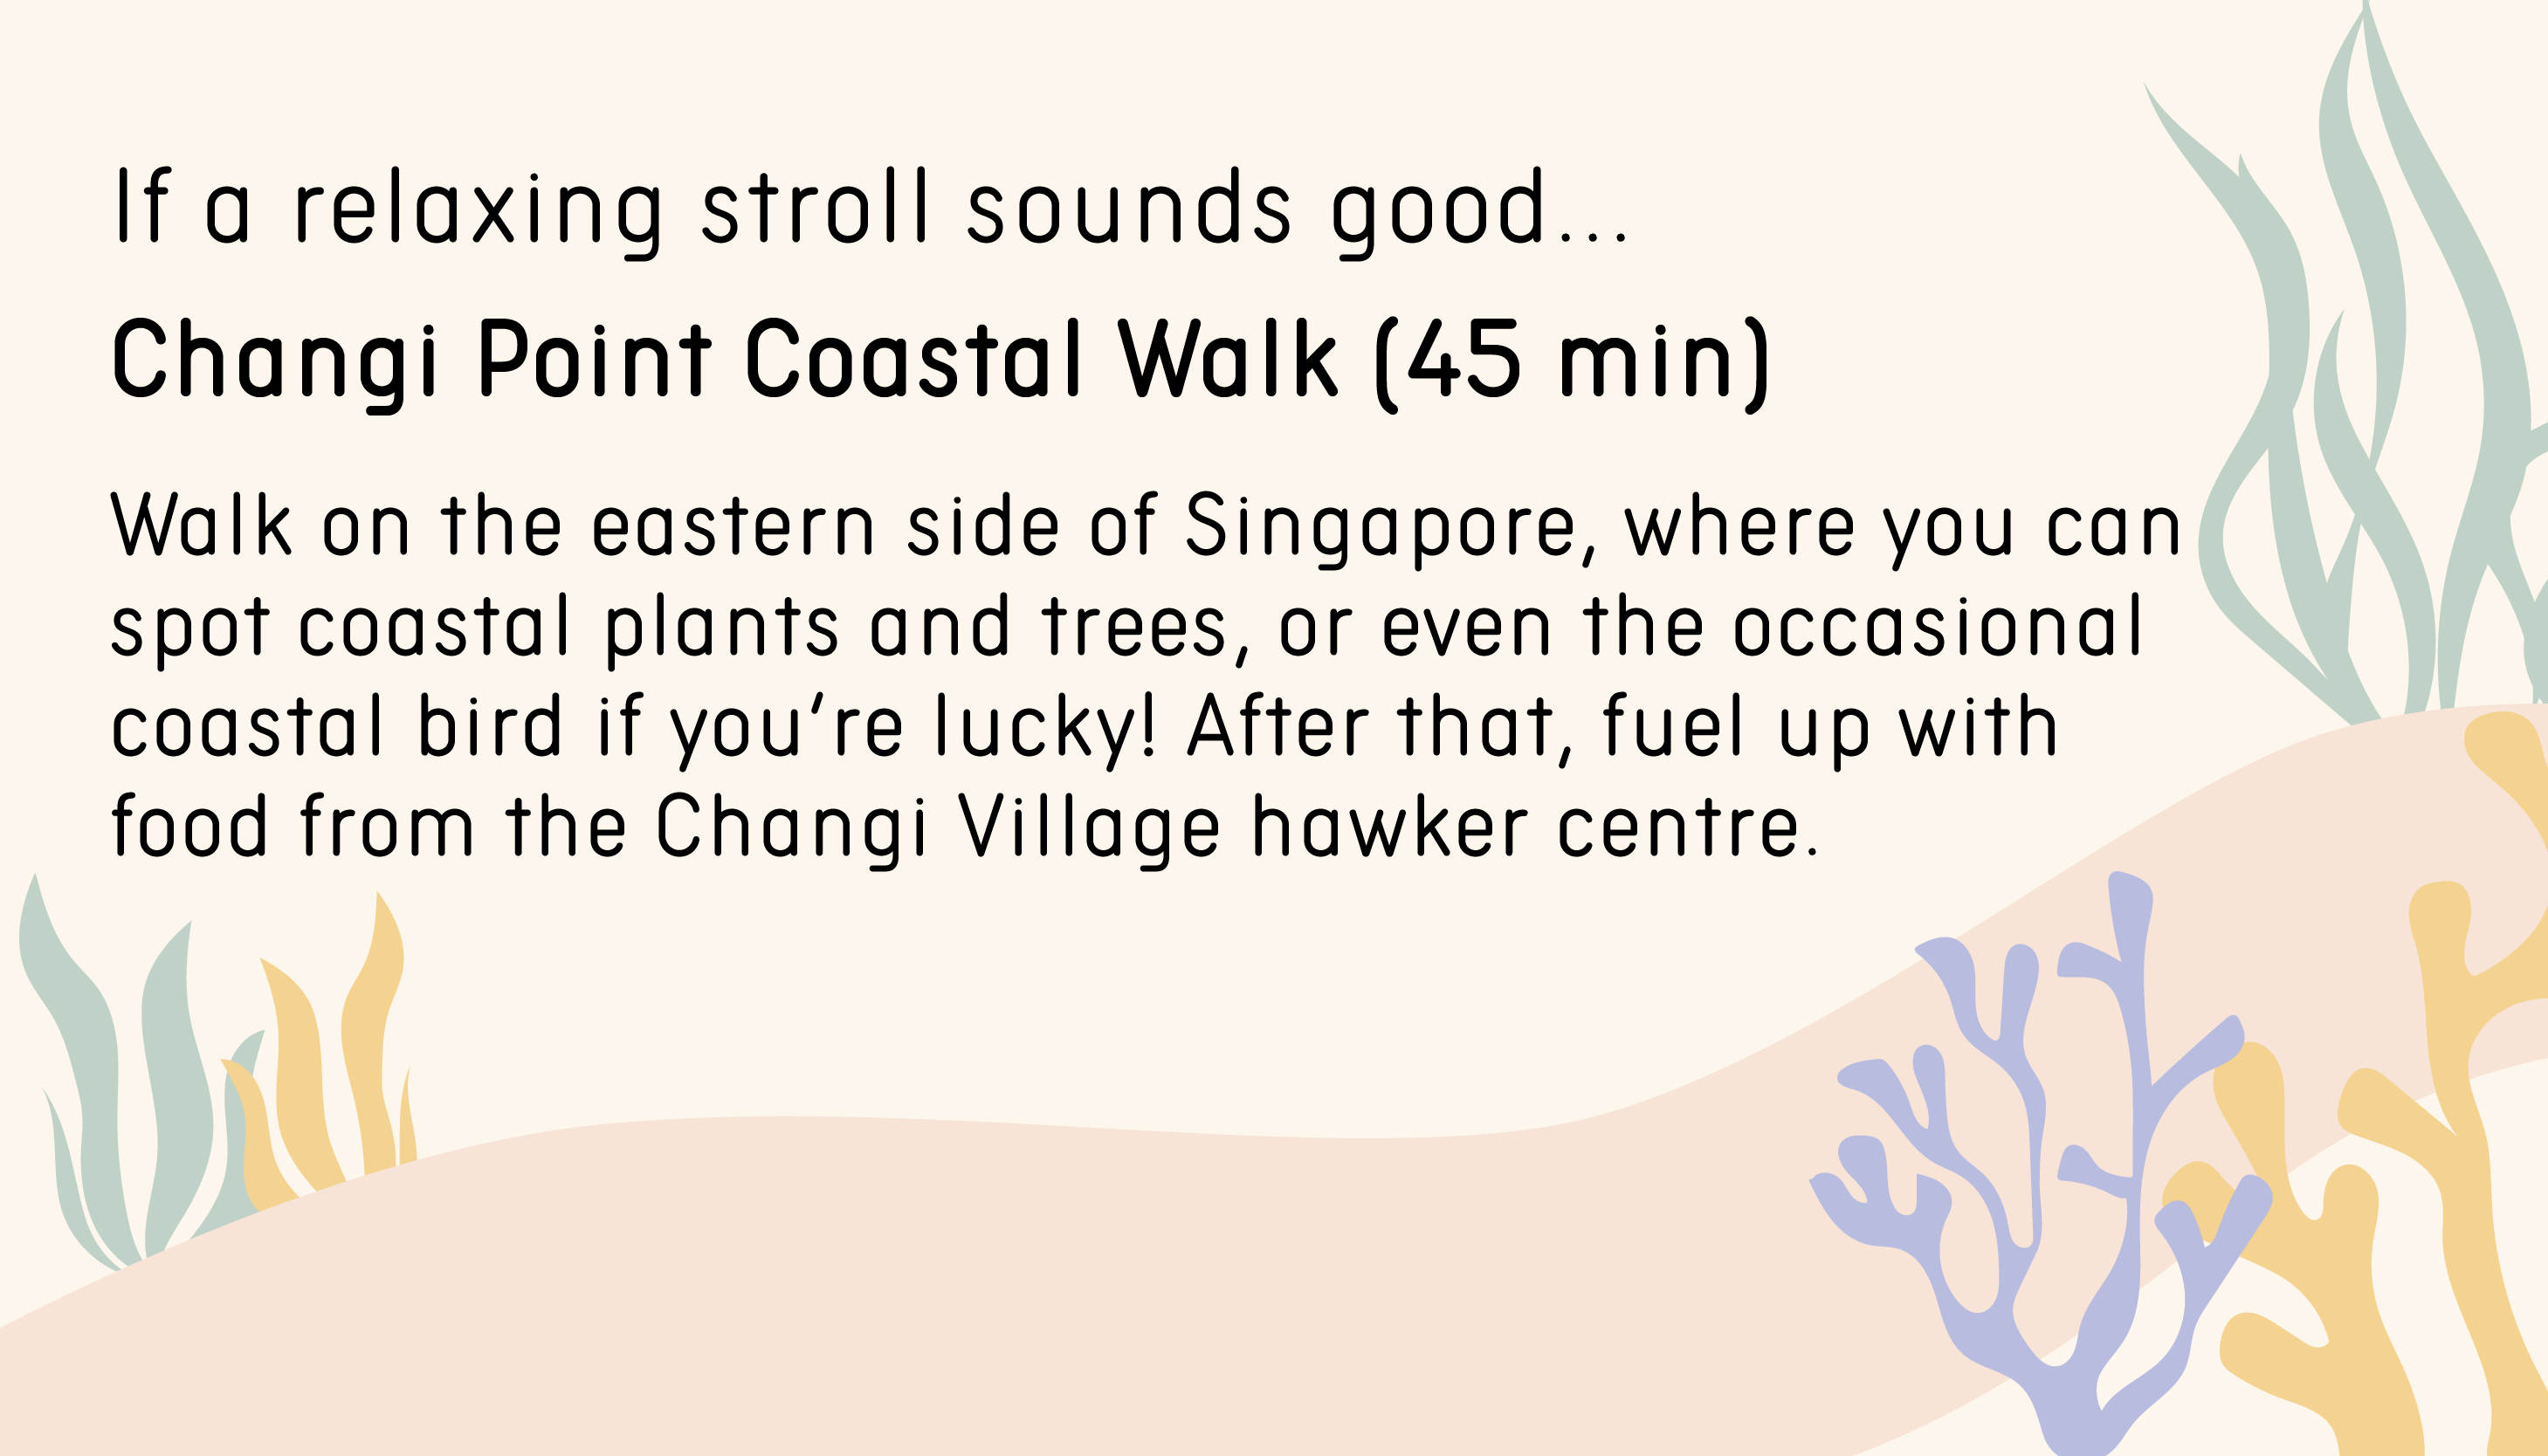 If a relaxing stroll sounds good… Changi Point Coastal Walk (45 min). Walk on the eastern side of Singapore, where you can spot coastal plants and trees, or even the occasional coastal bird if you’re lucky! After that, fuel up with food from the Changi Village hawker centre.